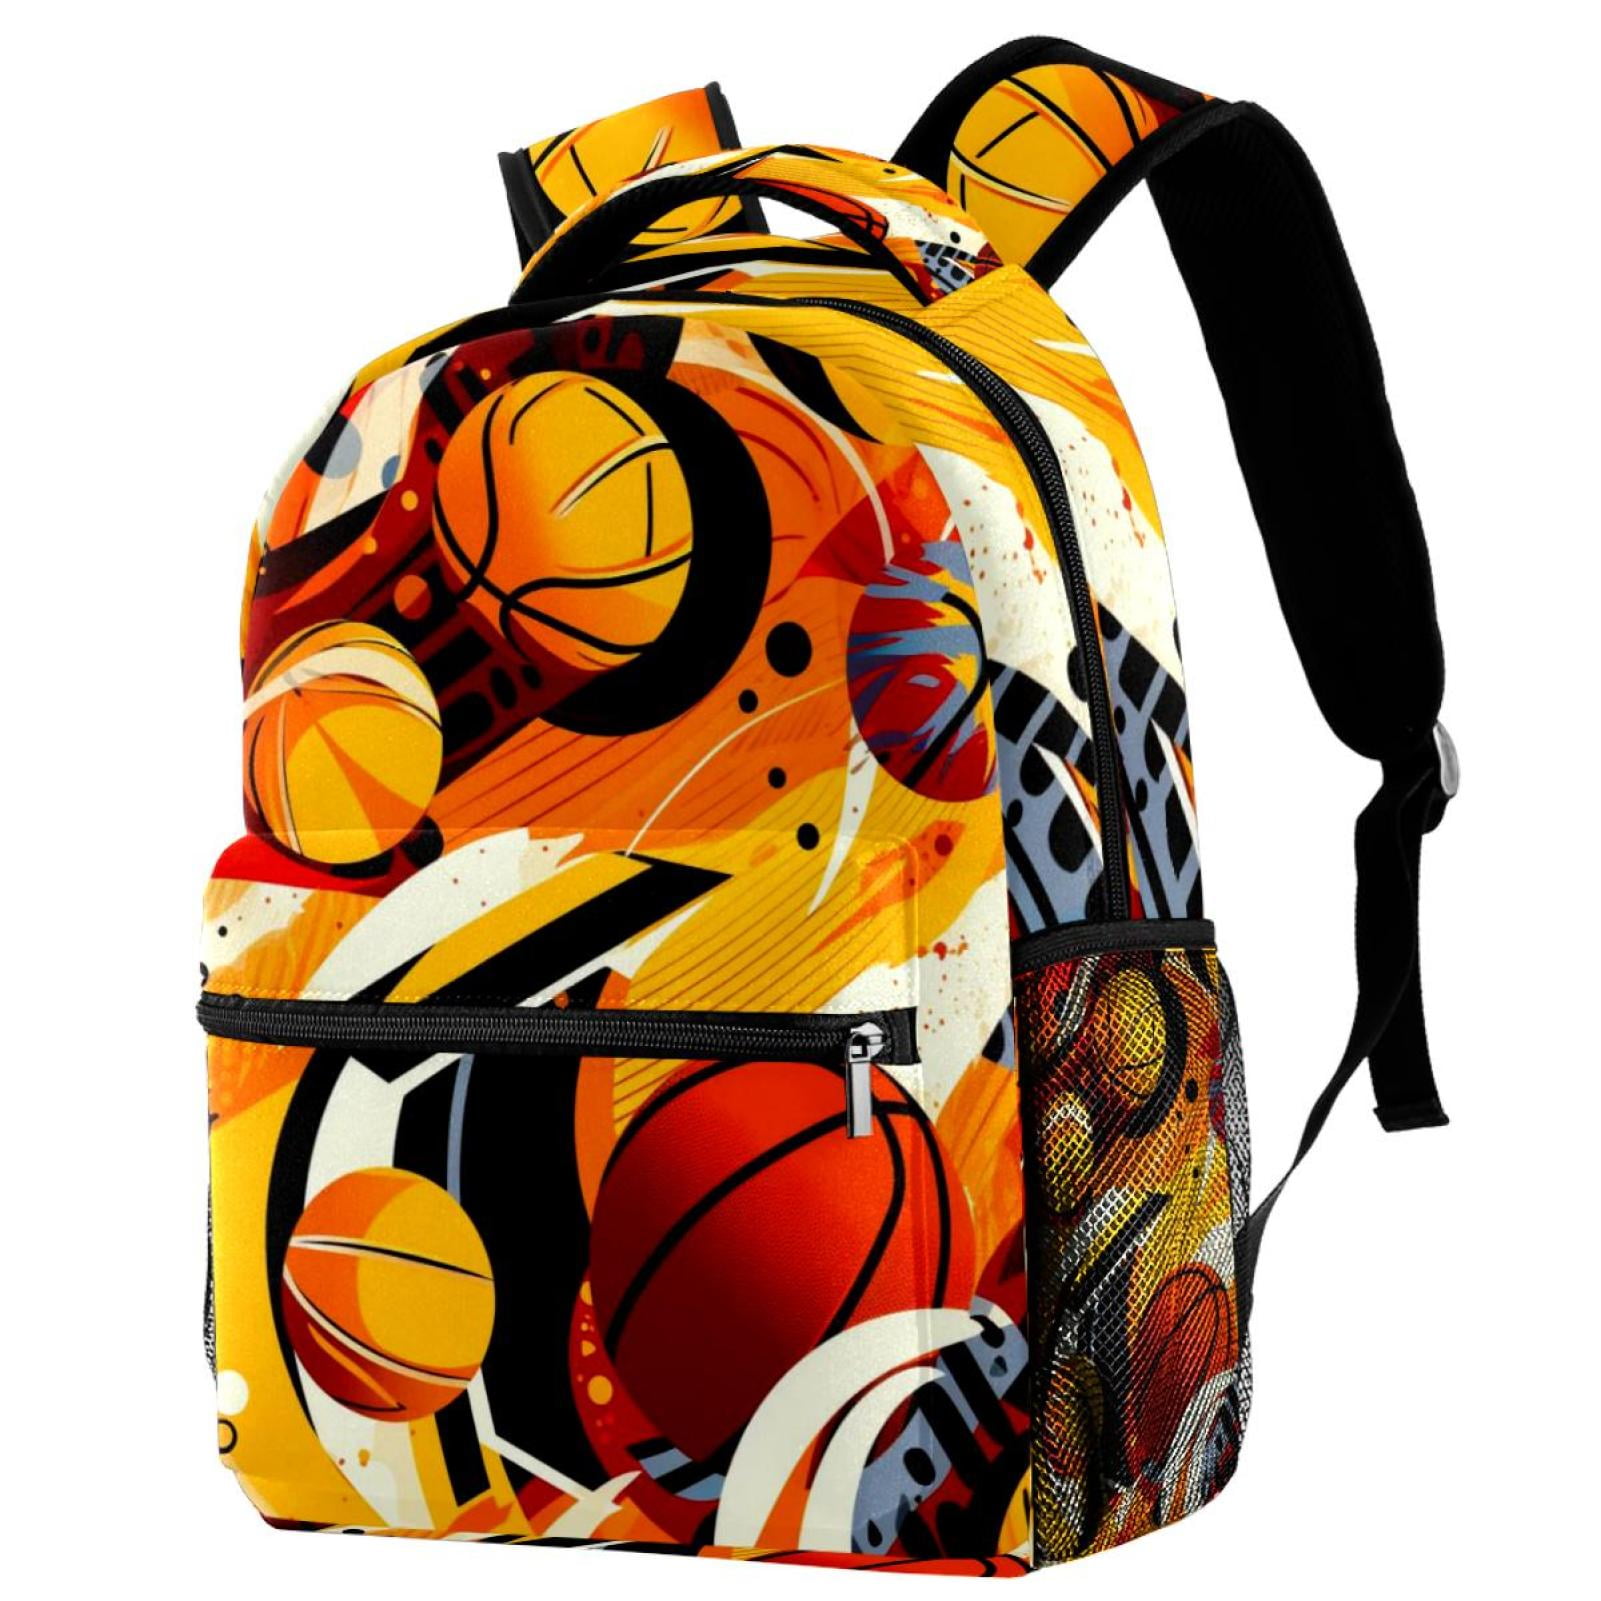 Basketball Backpack Travel Rucksack School Bags for Students Outdoor ...